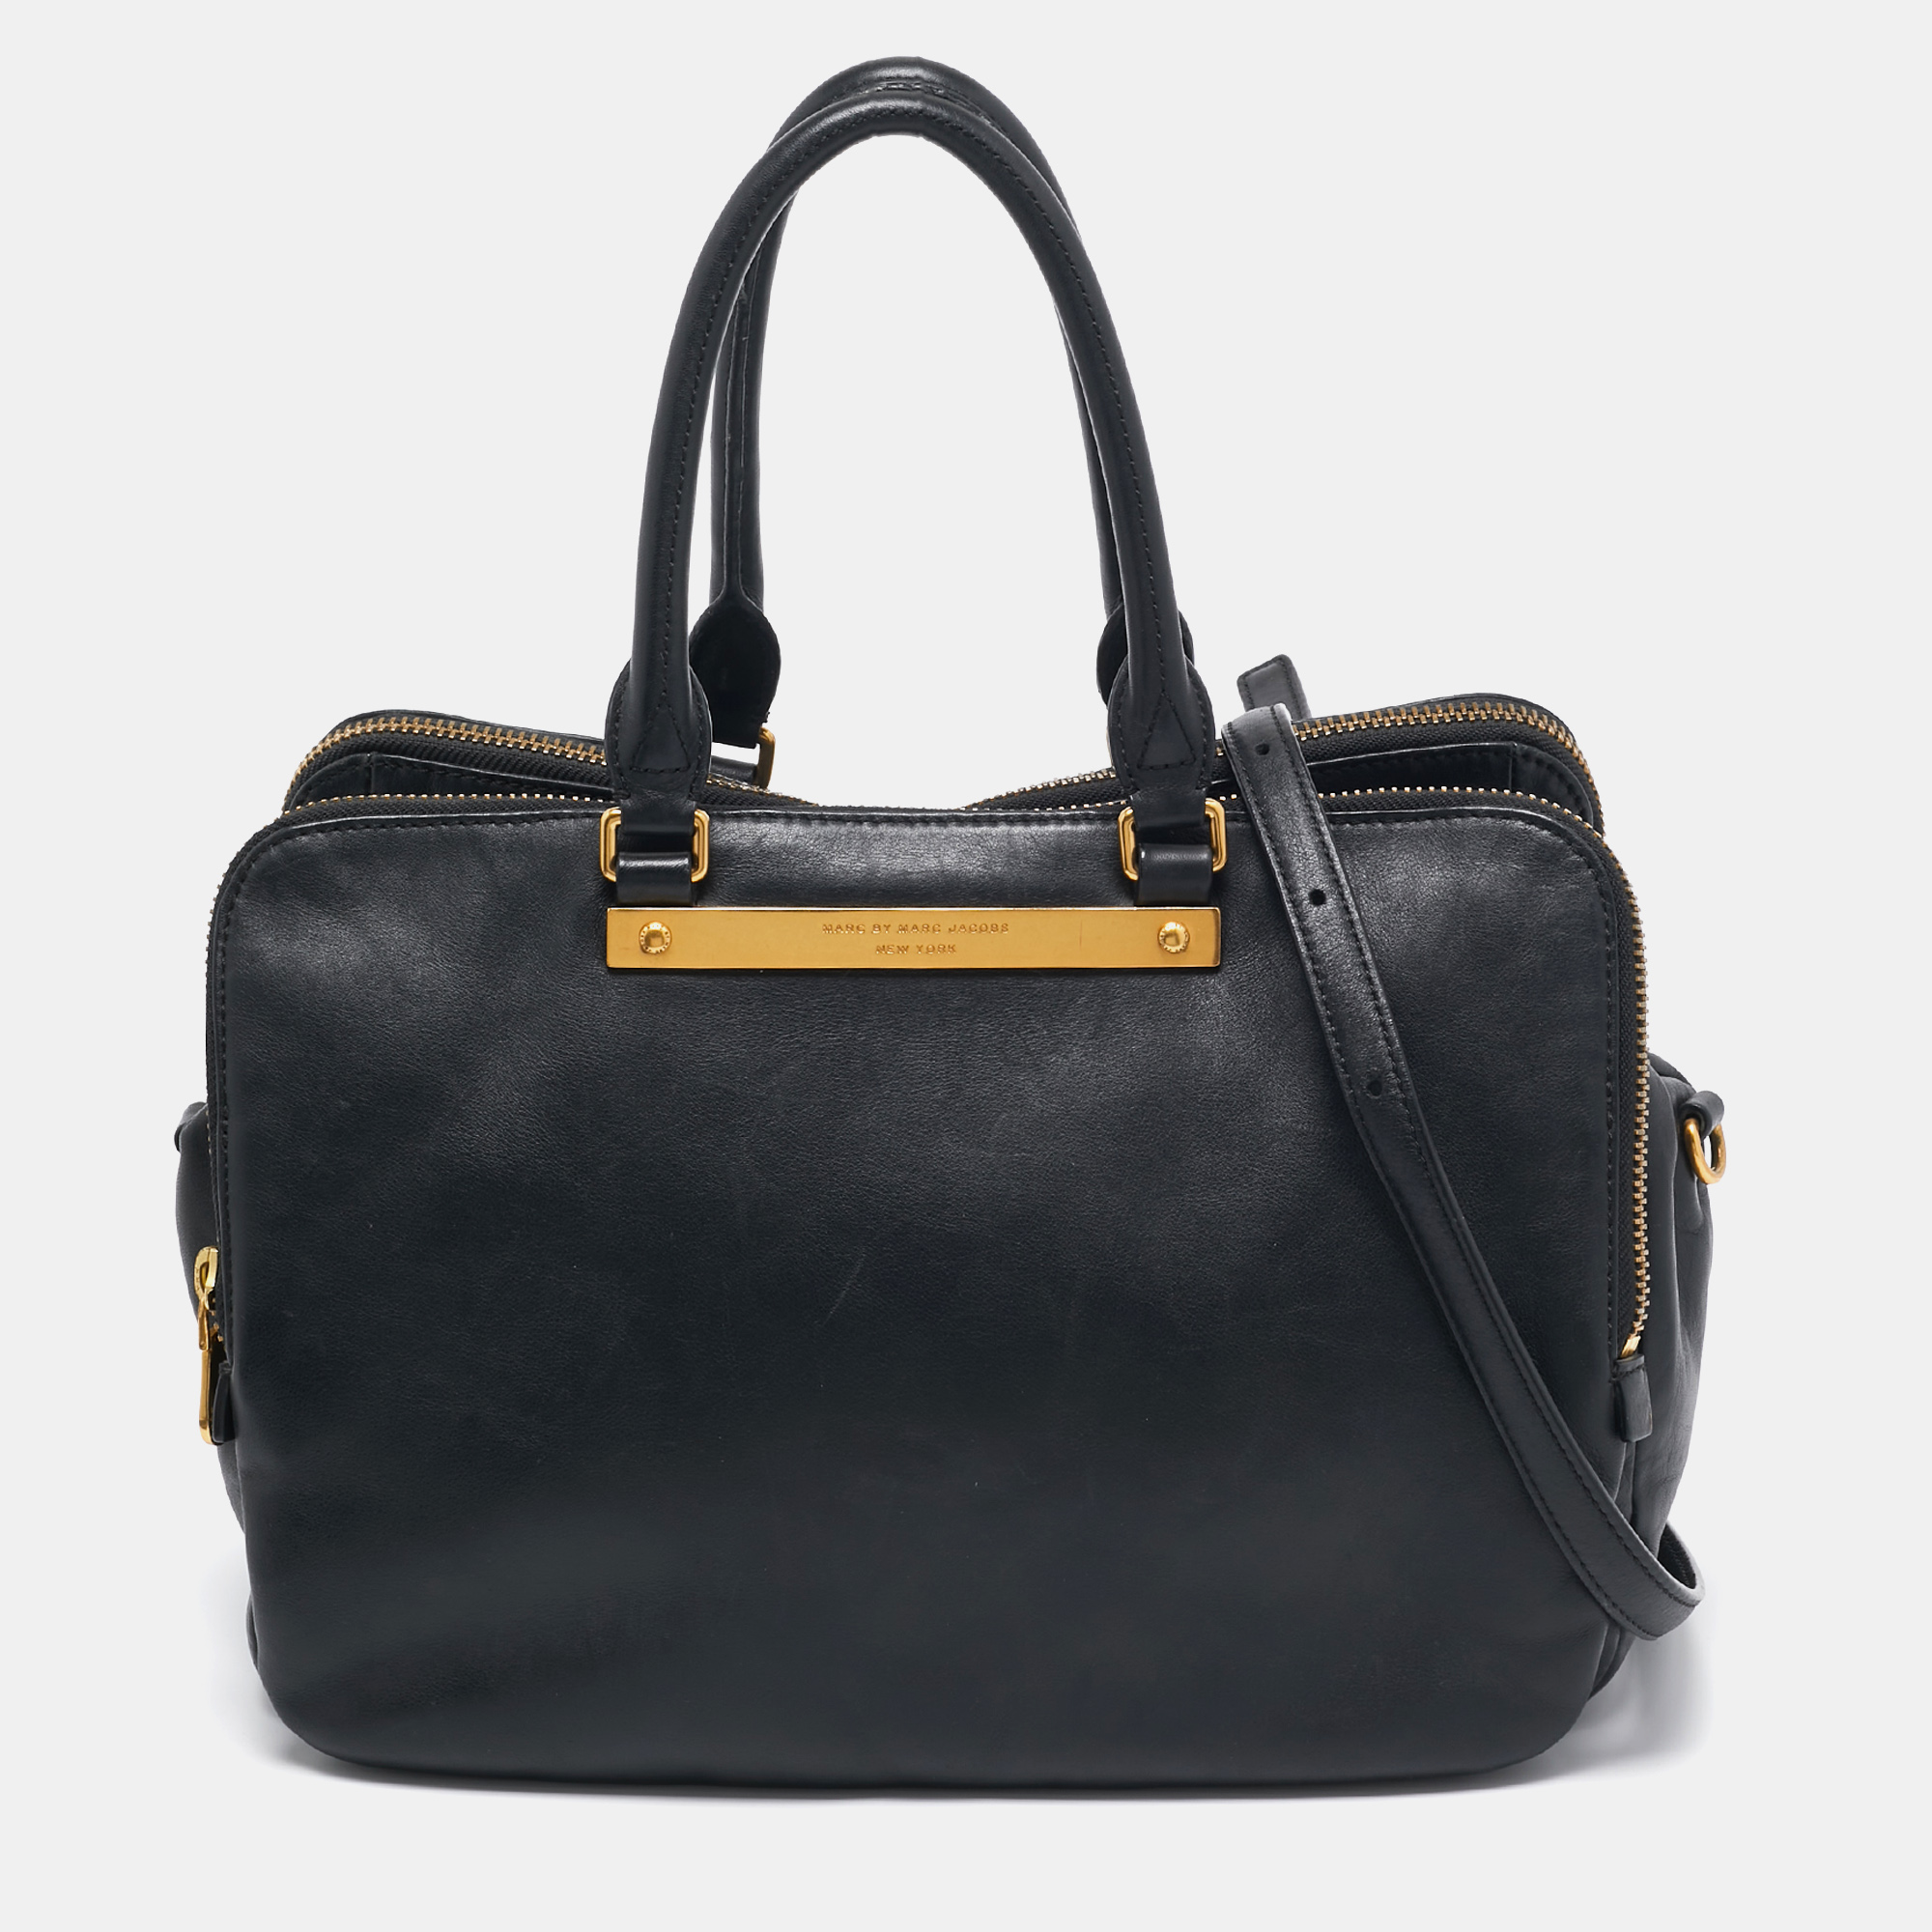 

Marc by Marc Jacobs Black Leather Goodbye Columbus Satchel